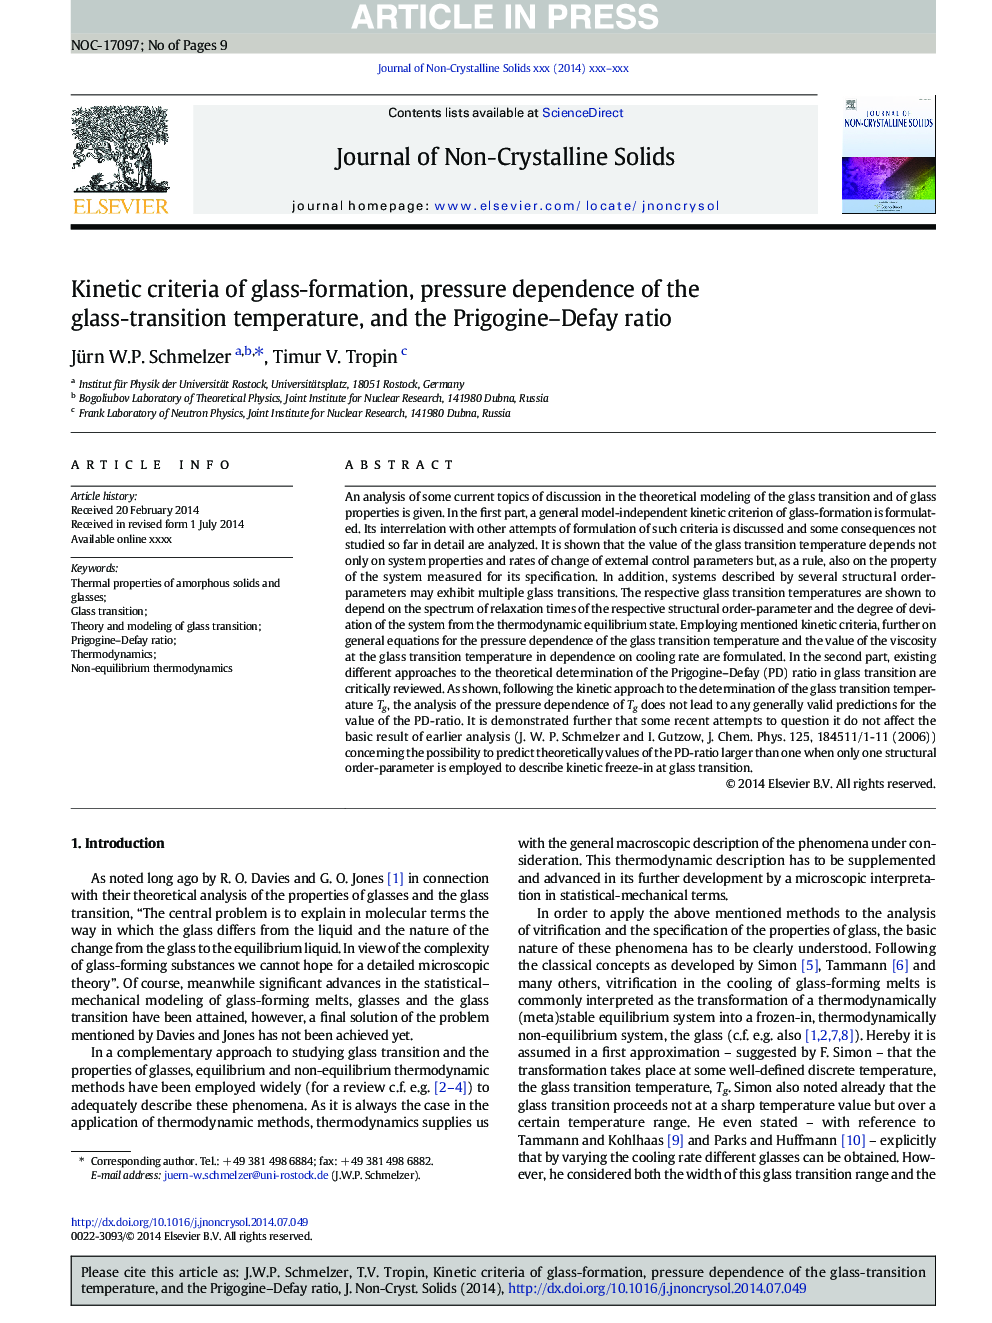 Kinetic criteria of glass-formation, pressure dependence of the glass-transition temperature, and the Prigogine-Defay ratio